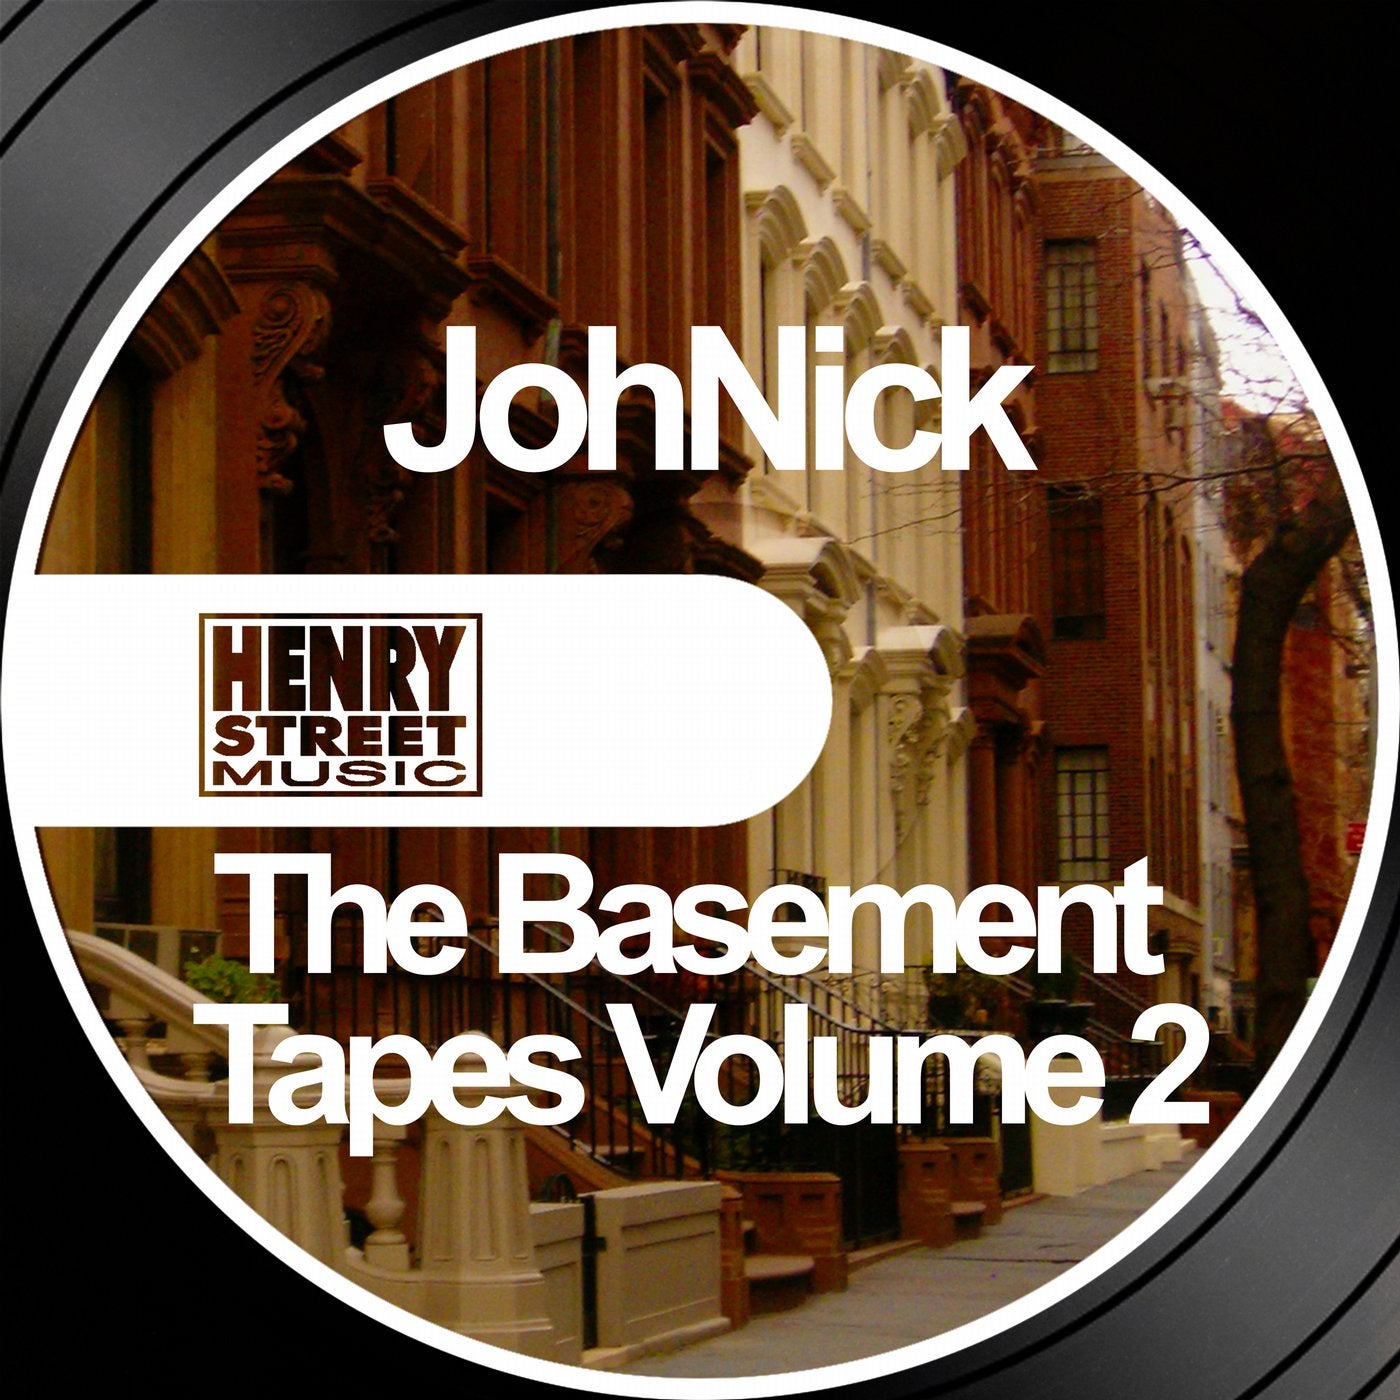 The Basement Tapes Volume 2